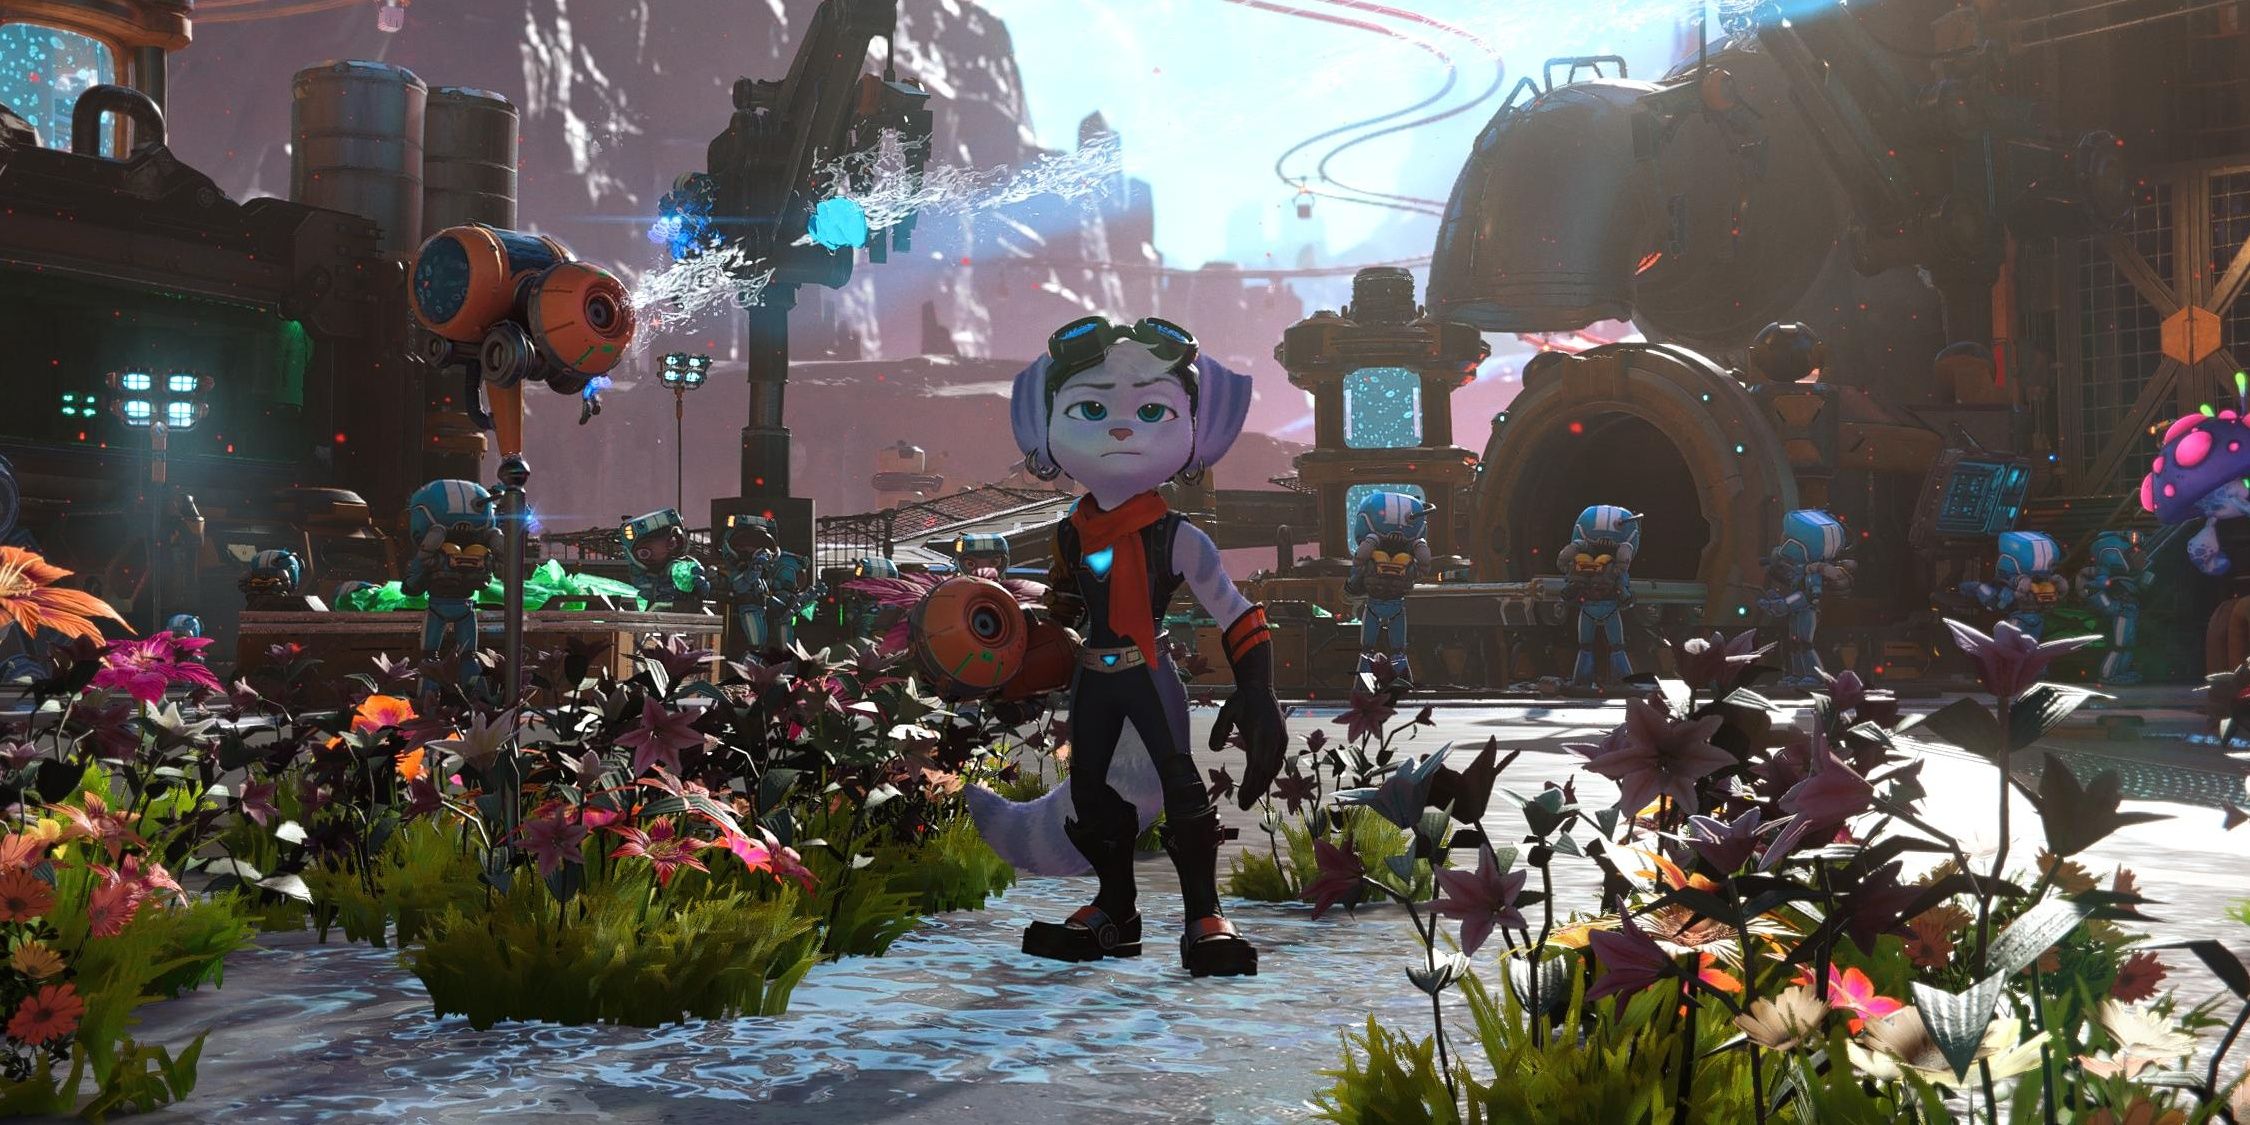 An unamused Rivet standing below the Topiary Sprinkler as it spray water and turns the ground into shrubs and flowers in Ratchet and Clank: Rift Apart